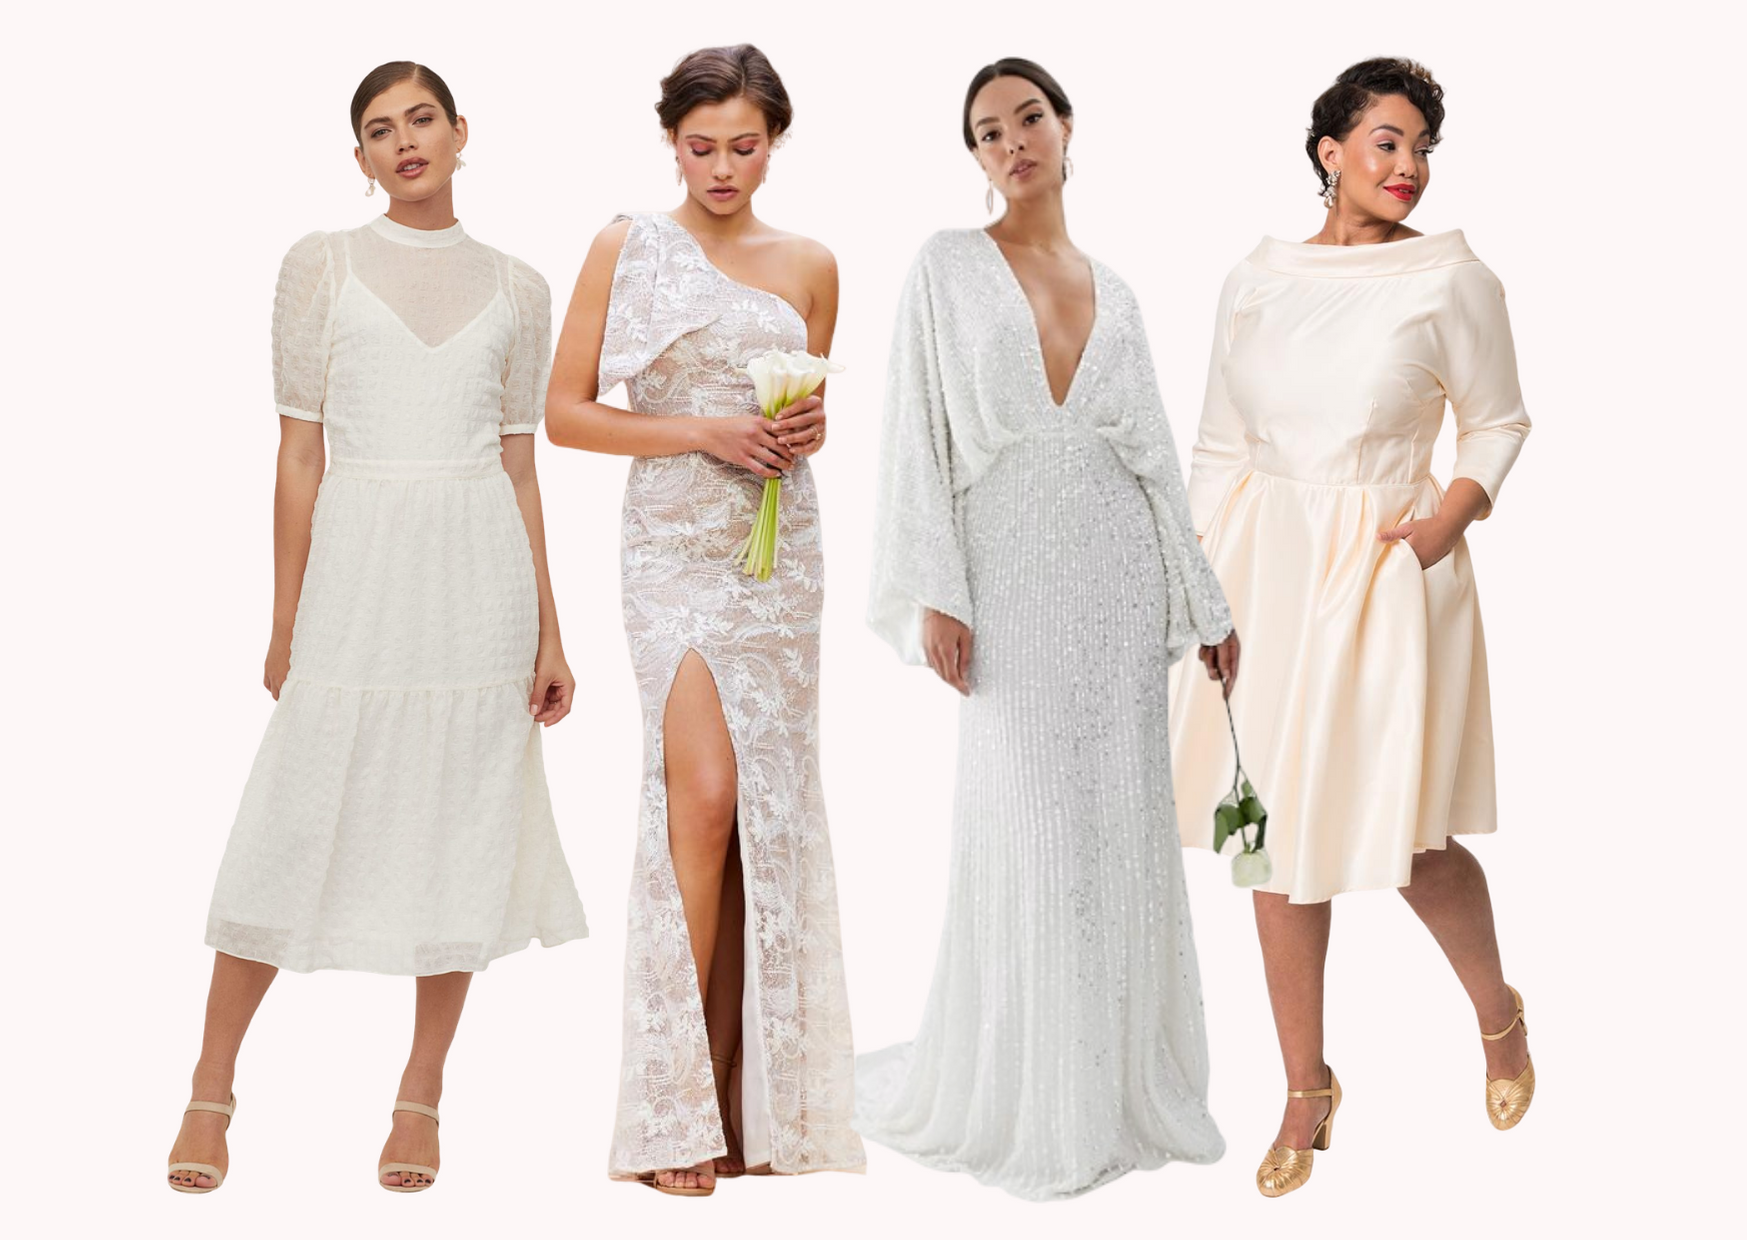 Off The Rack Wedding Dresses To Buy Today | A Practical Wedding